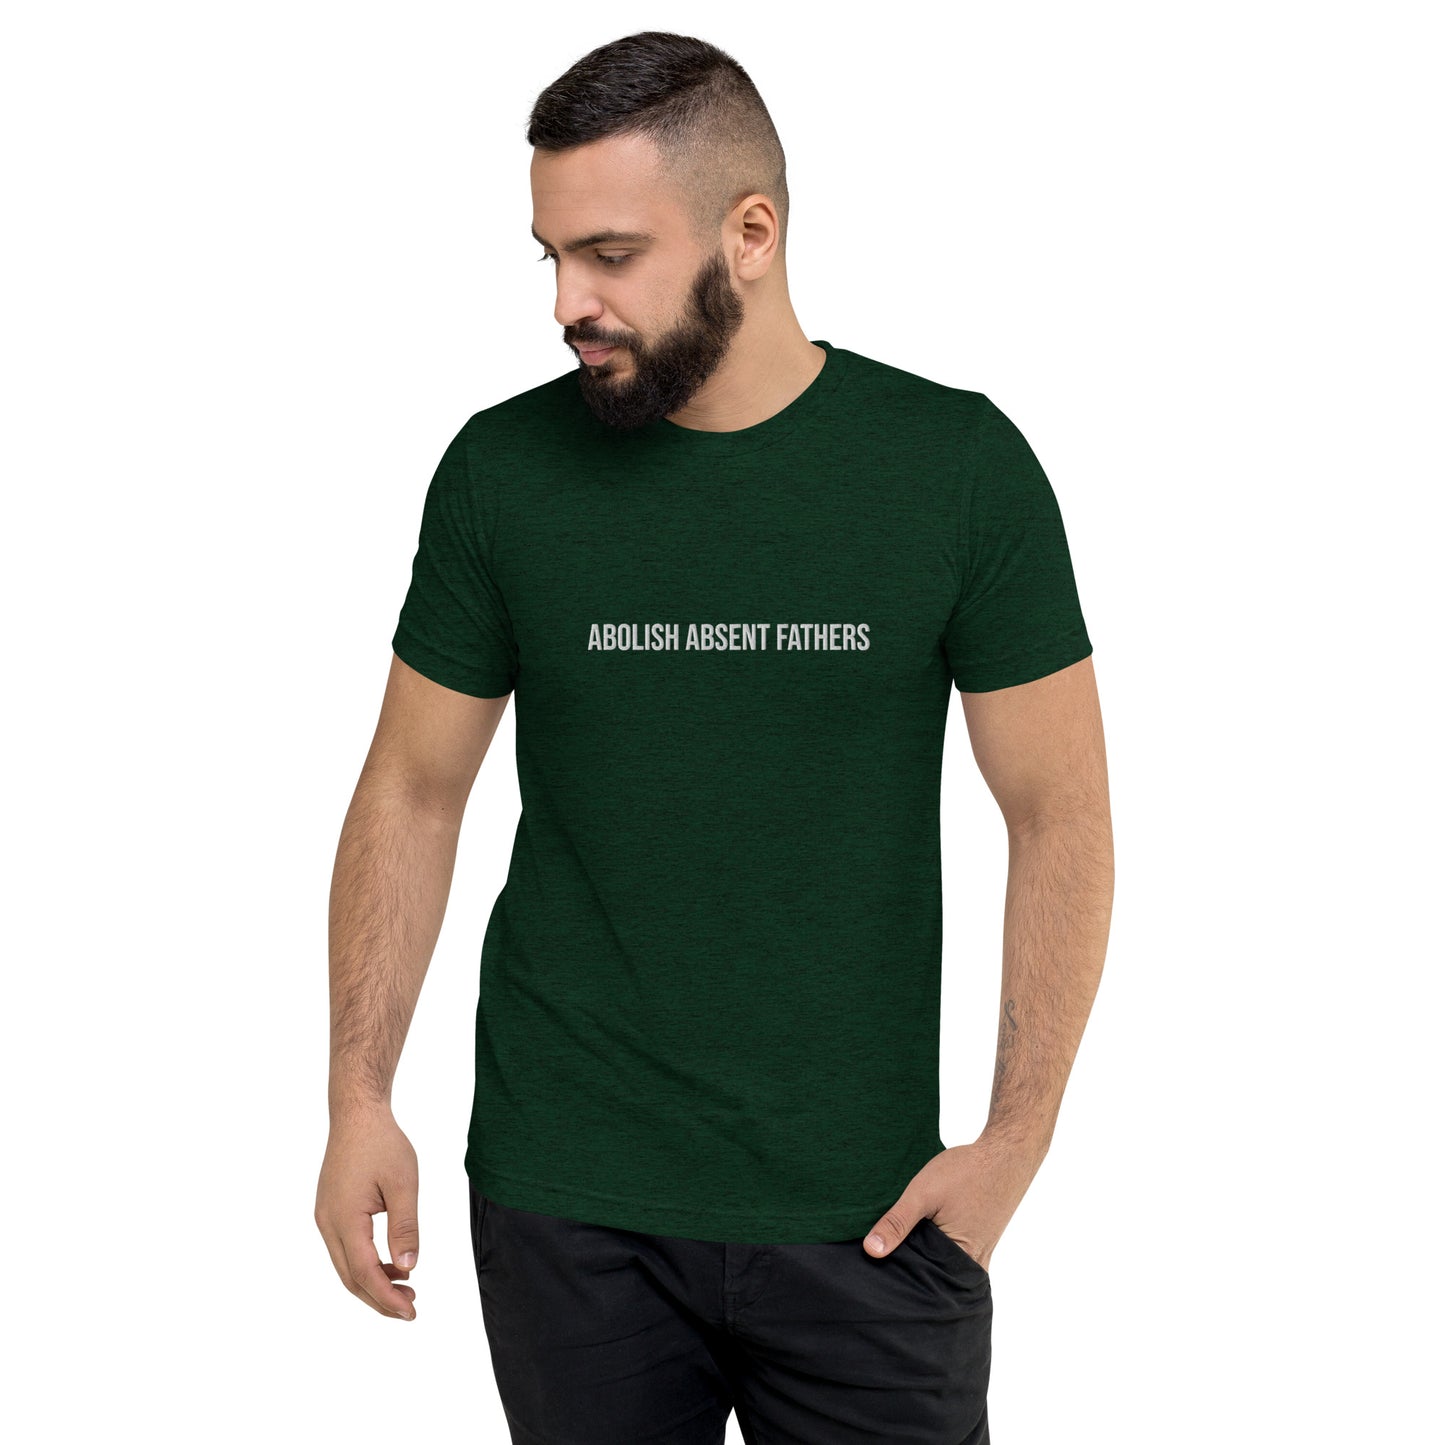 Abolish Absent Fathers Embroidered Unisex T-Shirt